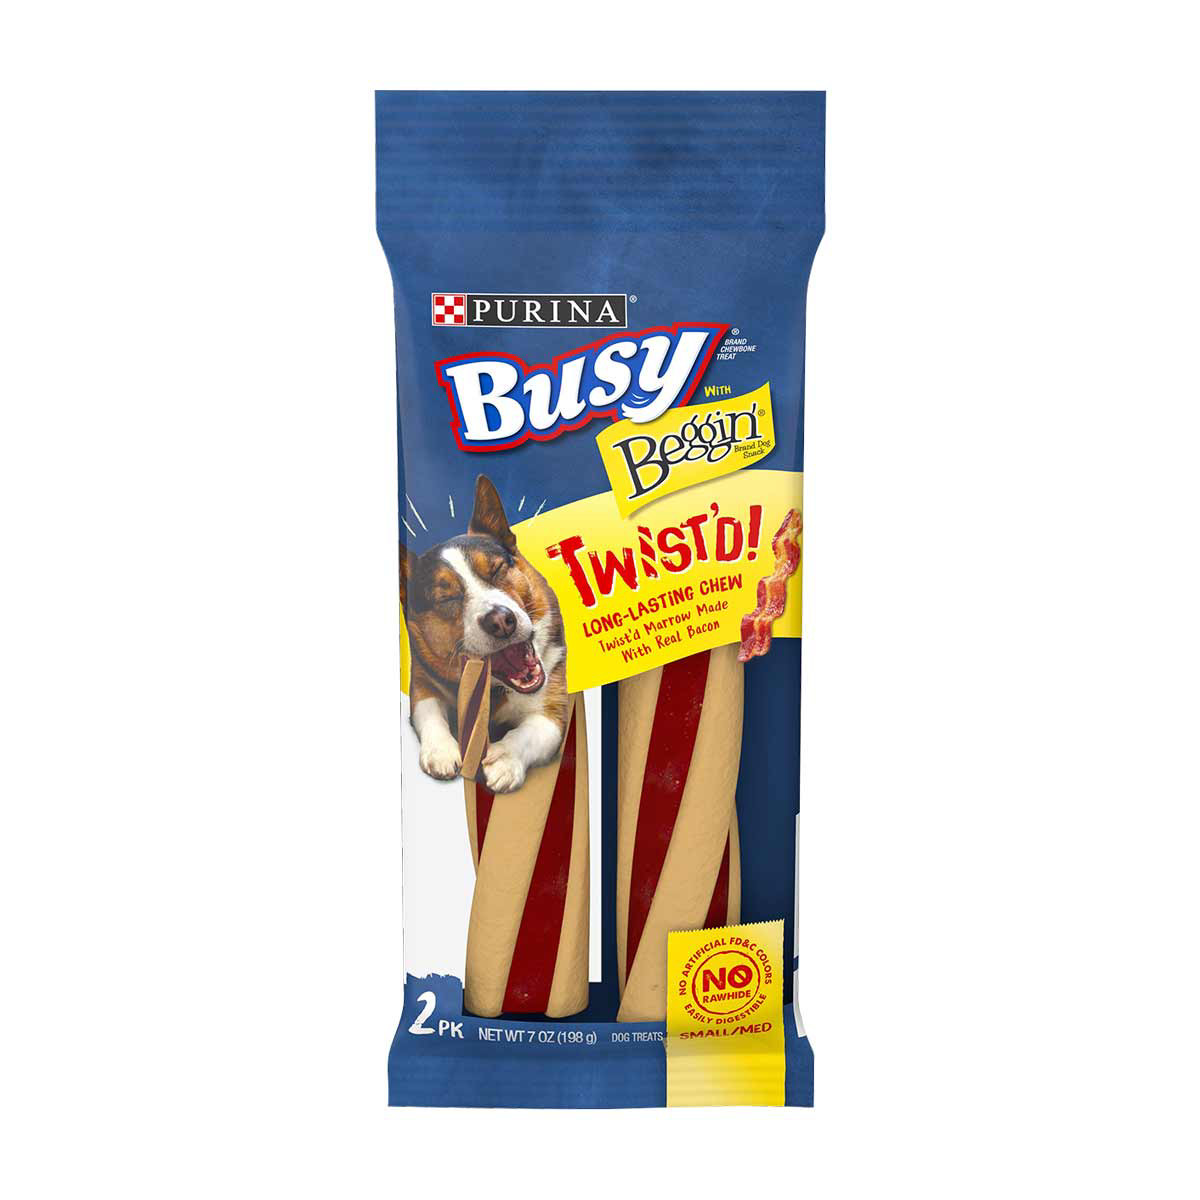 Purina Busy with Beggin Twist'd Dog Treats, 2 Count